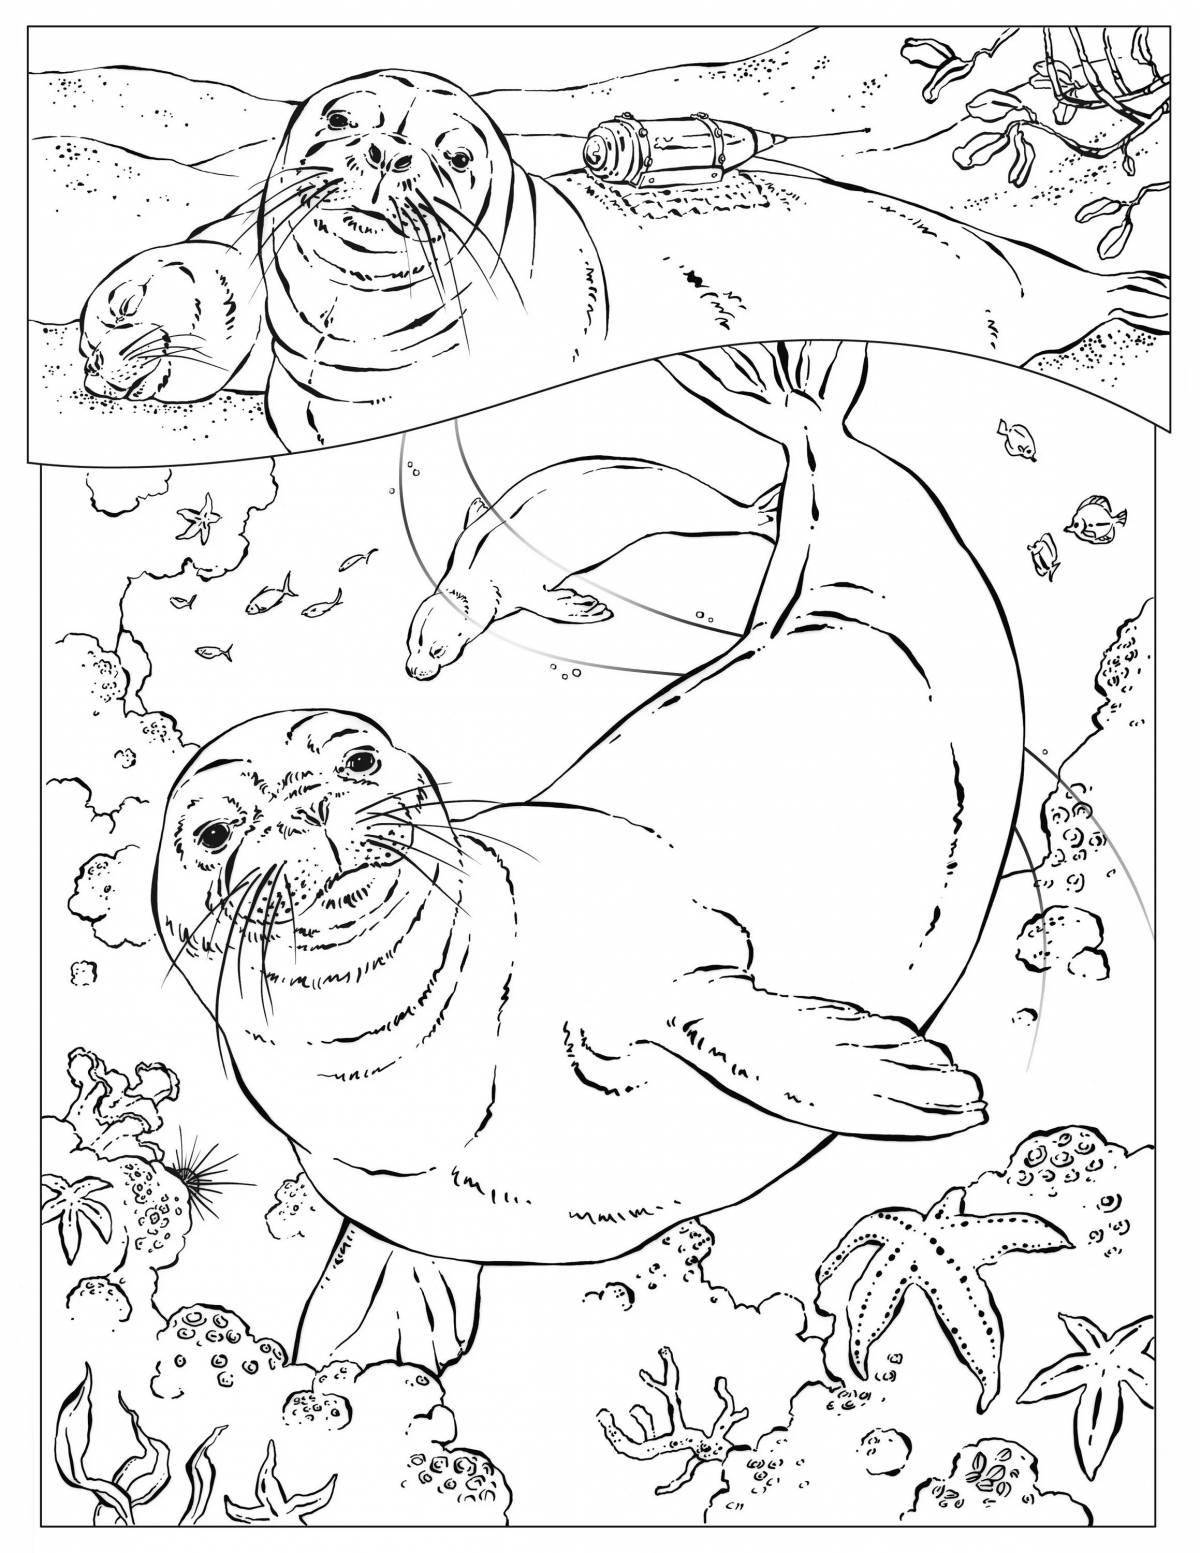 Cheerful Baikal seal coloring for children